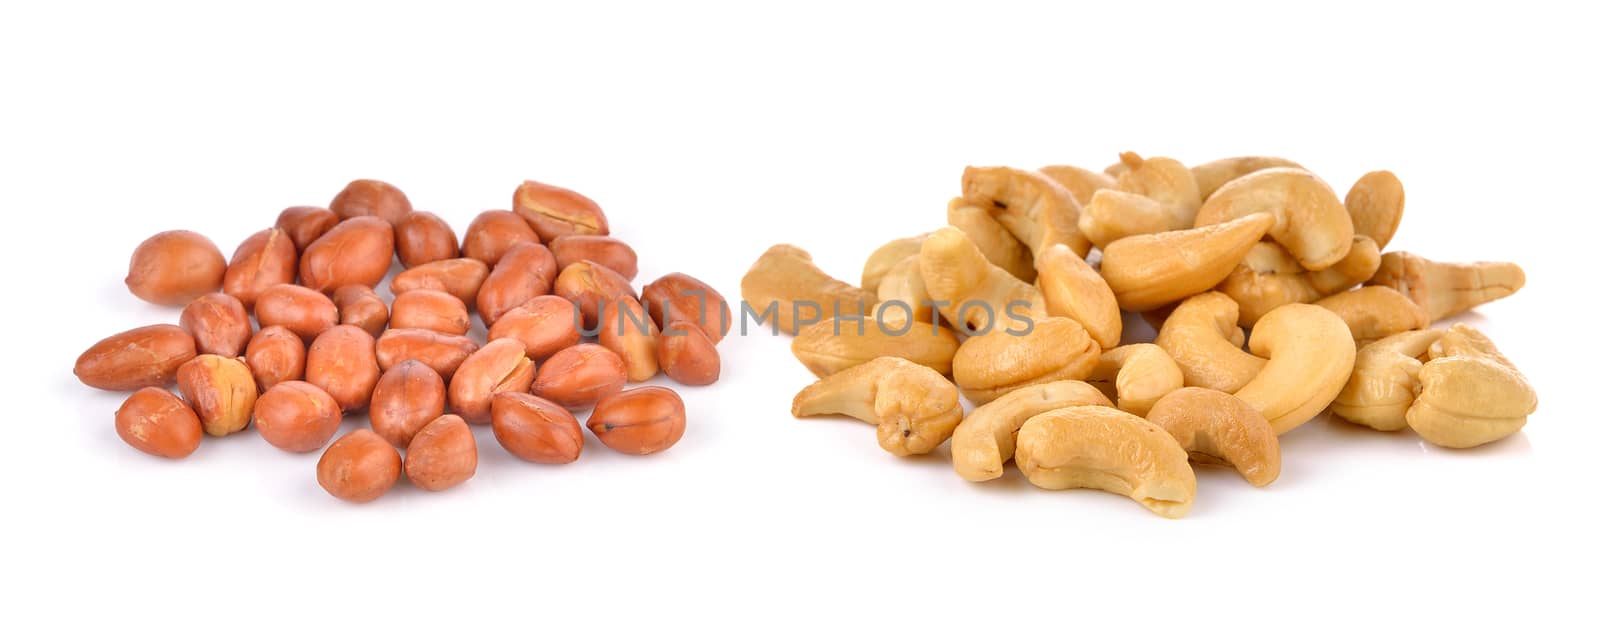 Cashews and peanats on white background  by sommai